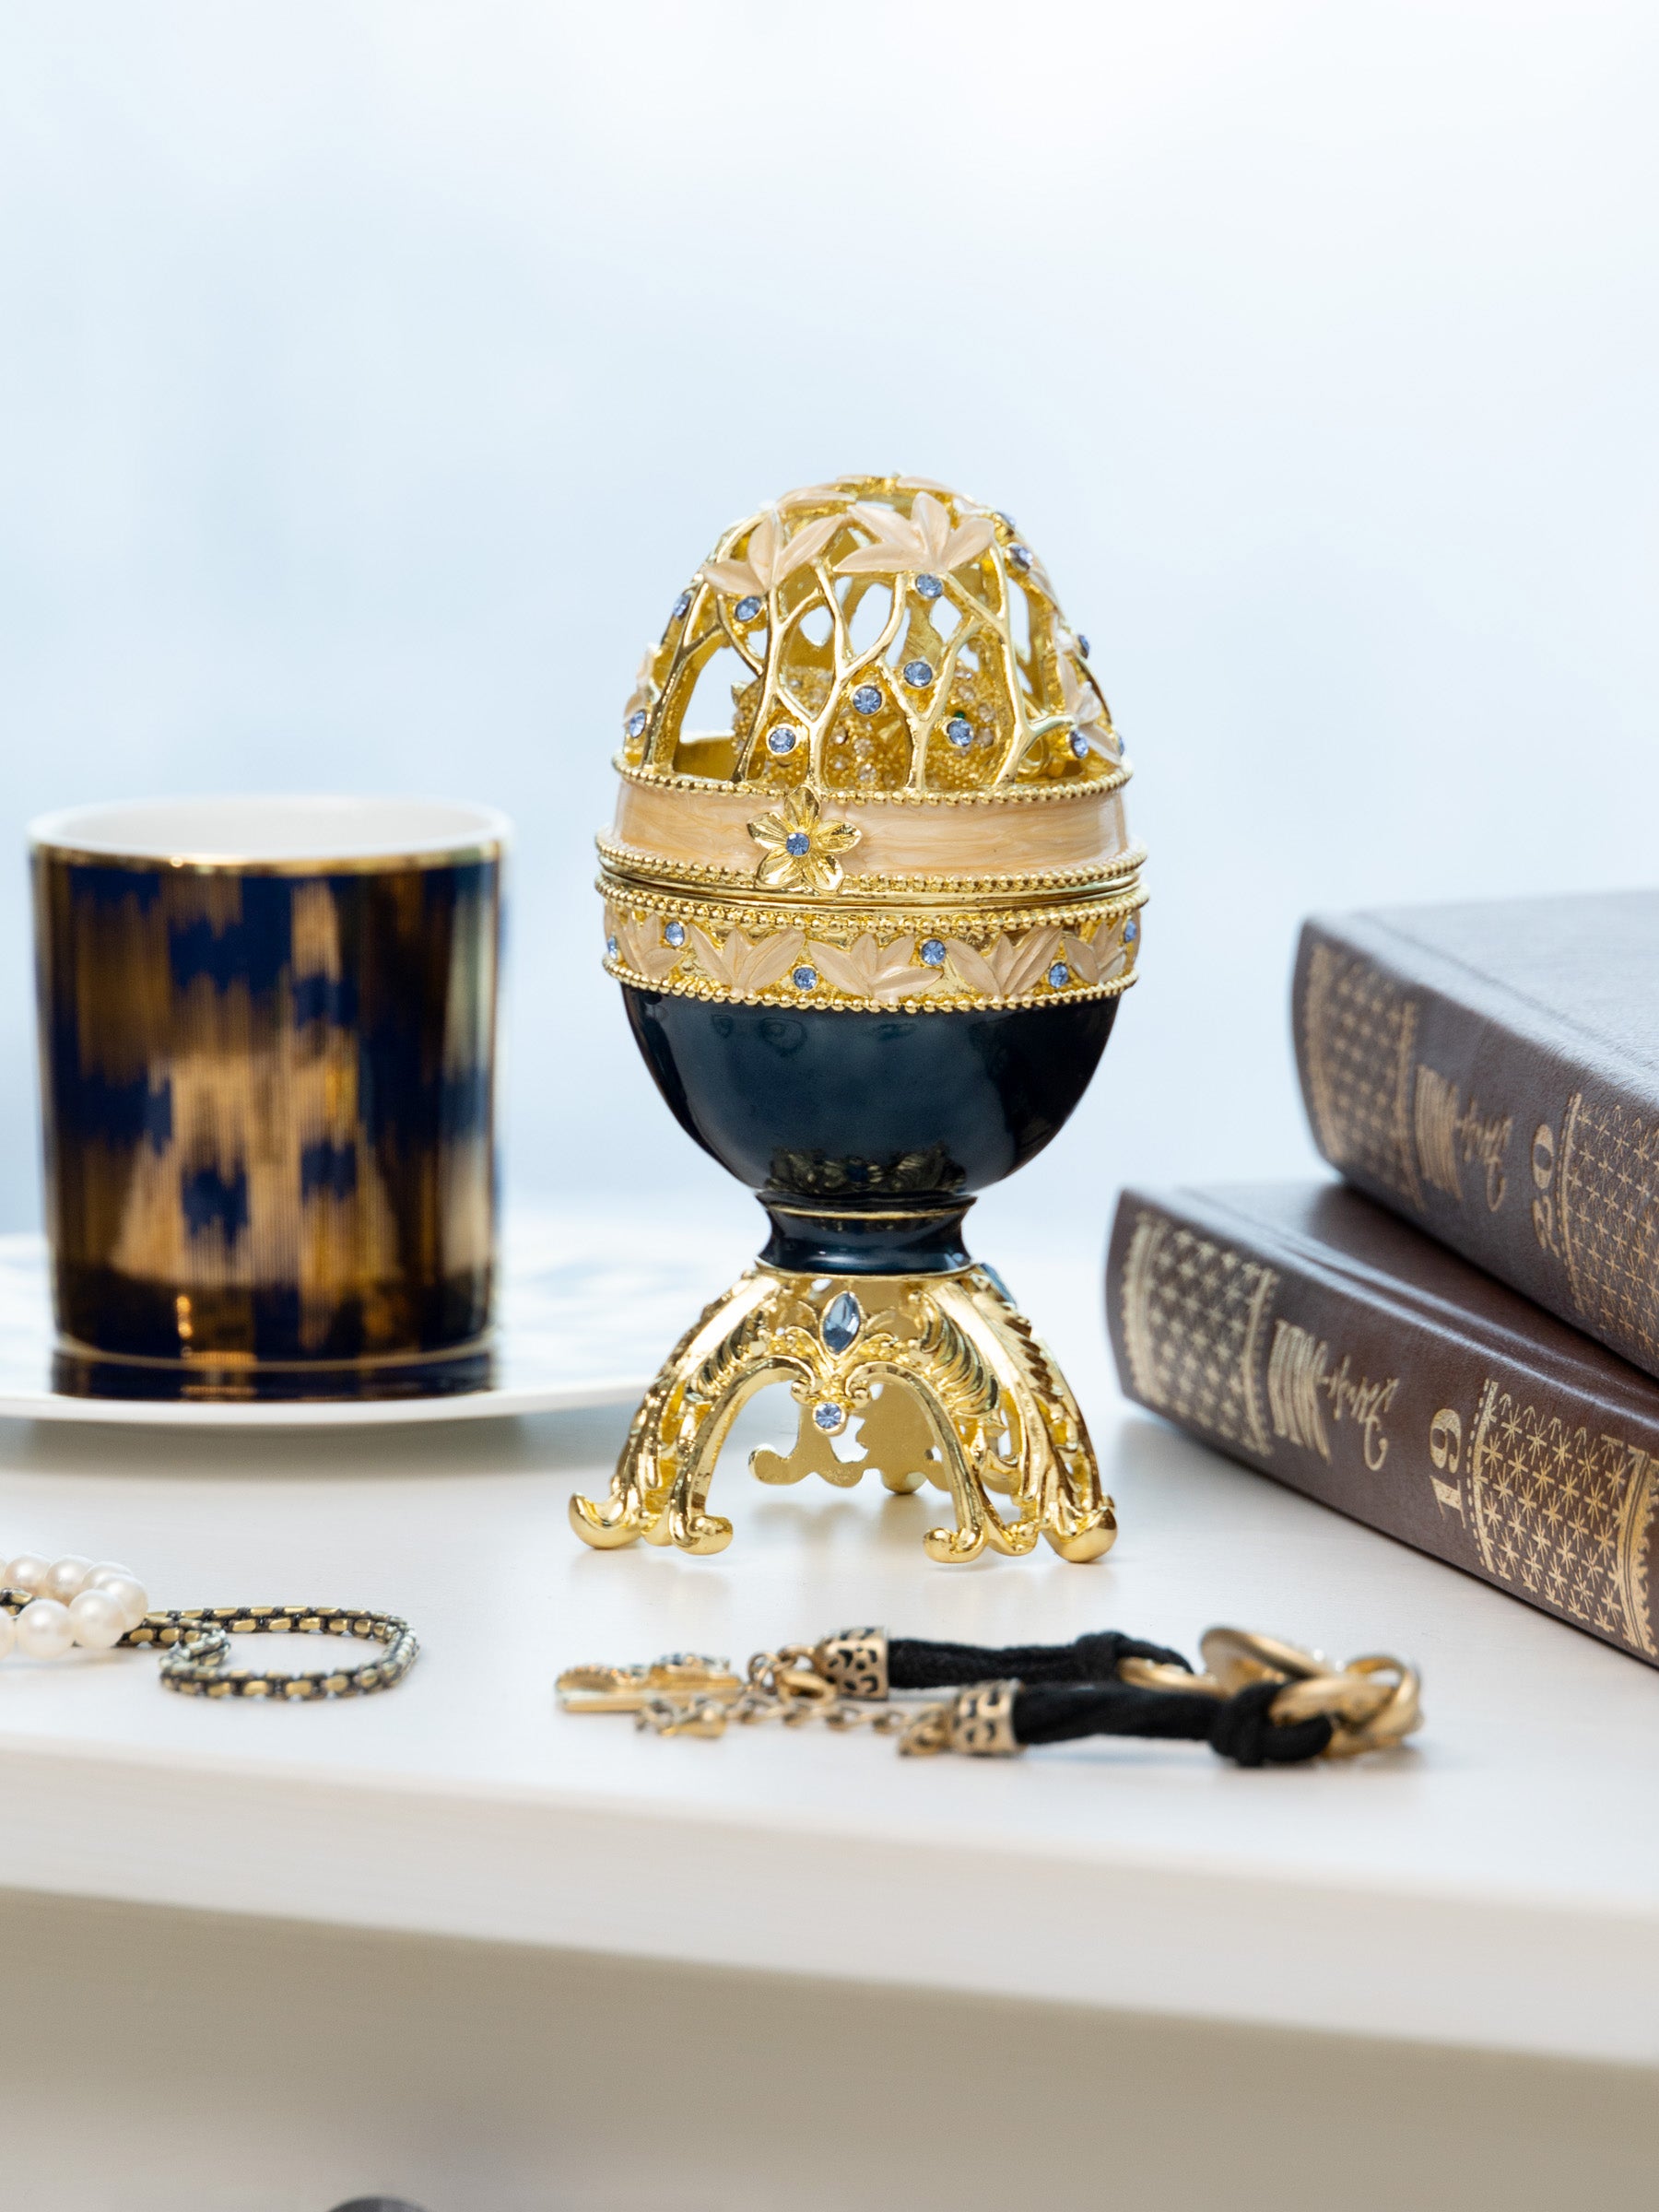 Golden Blue Faberge Egg with a Golden Elephant